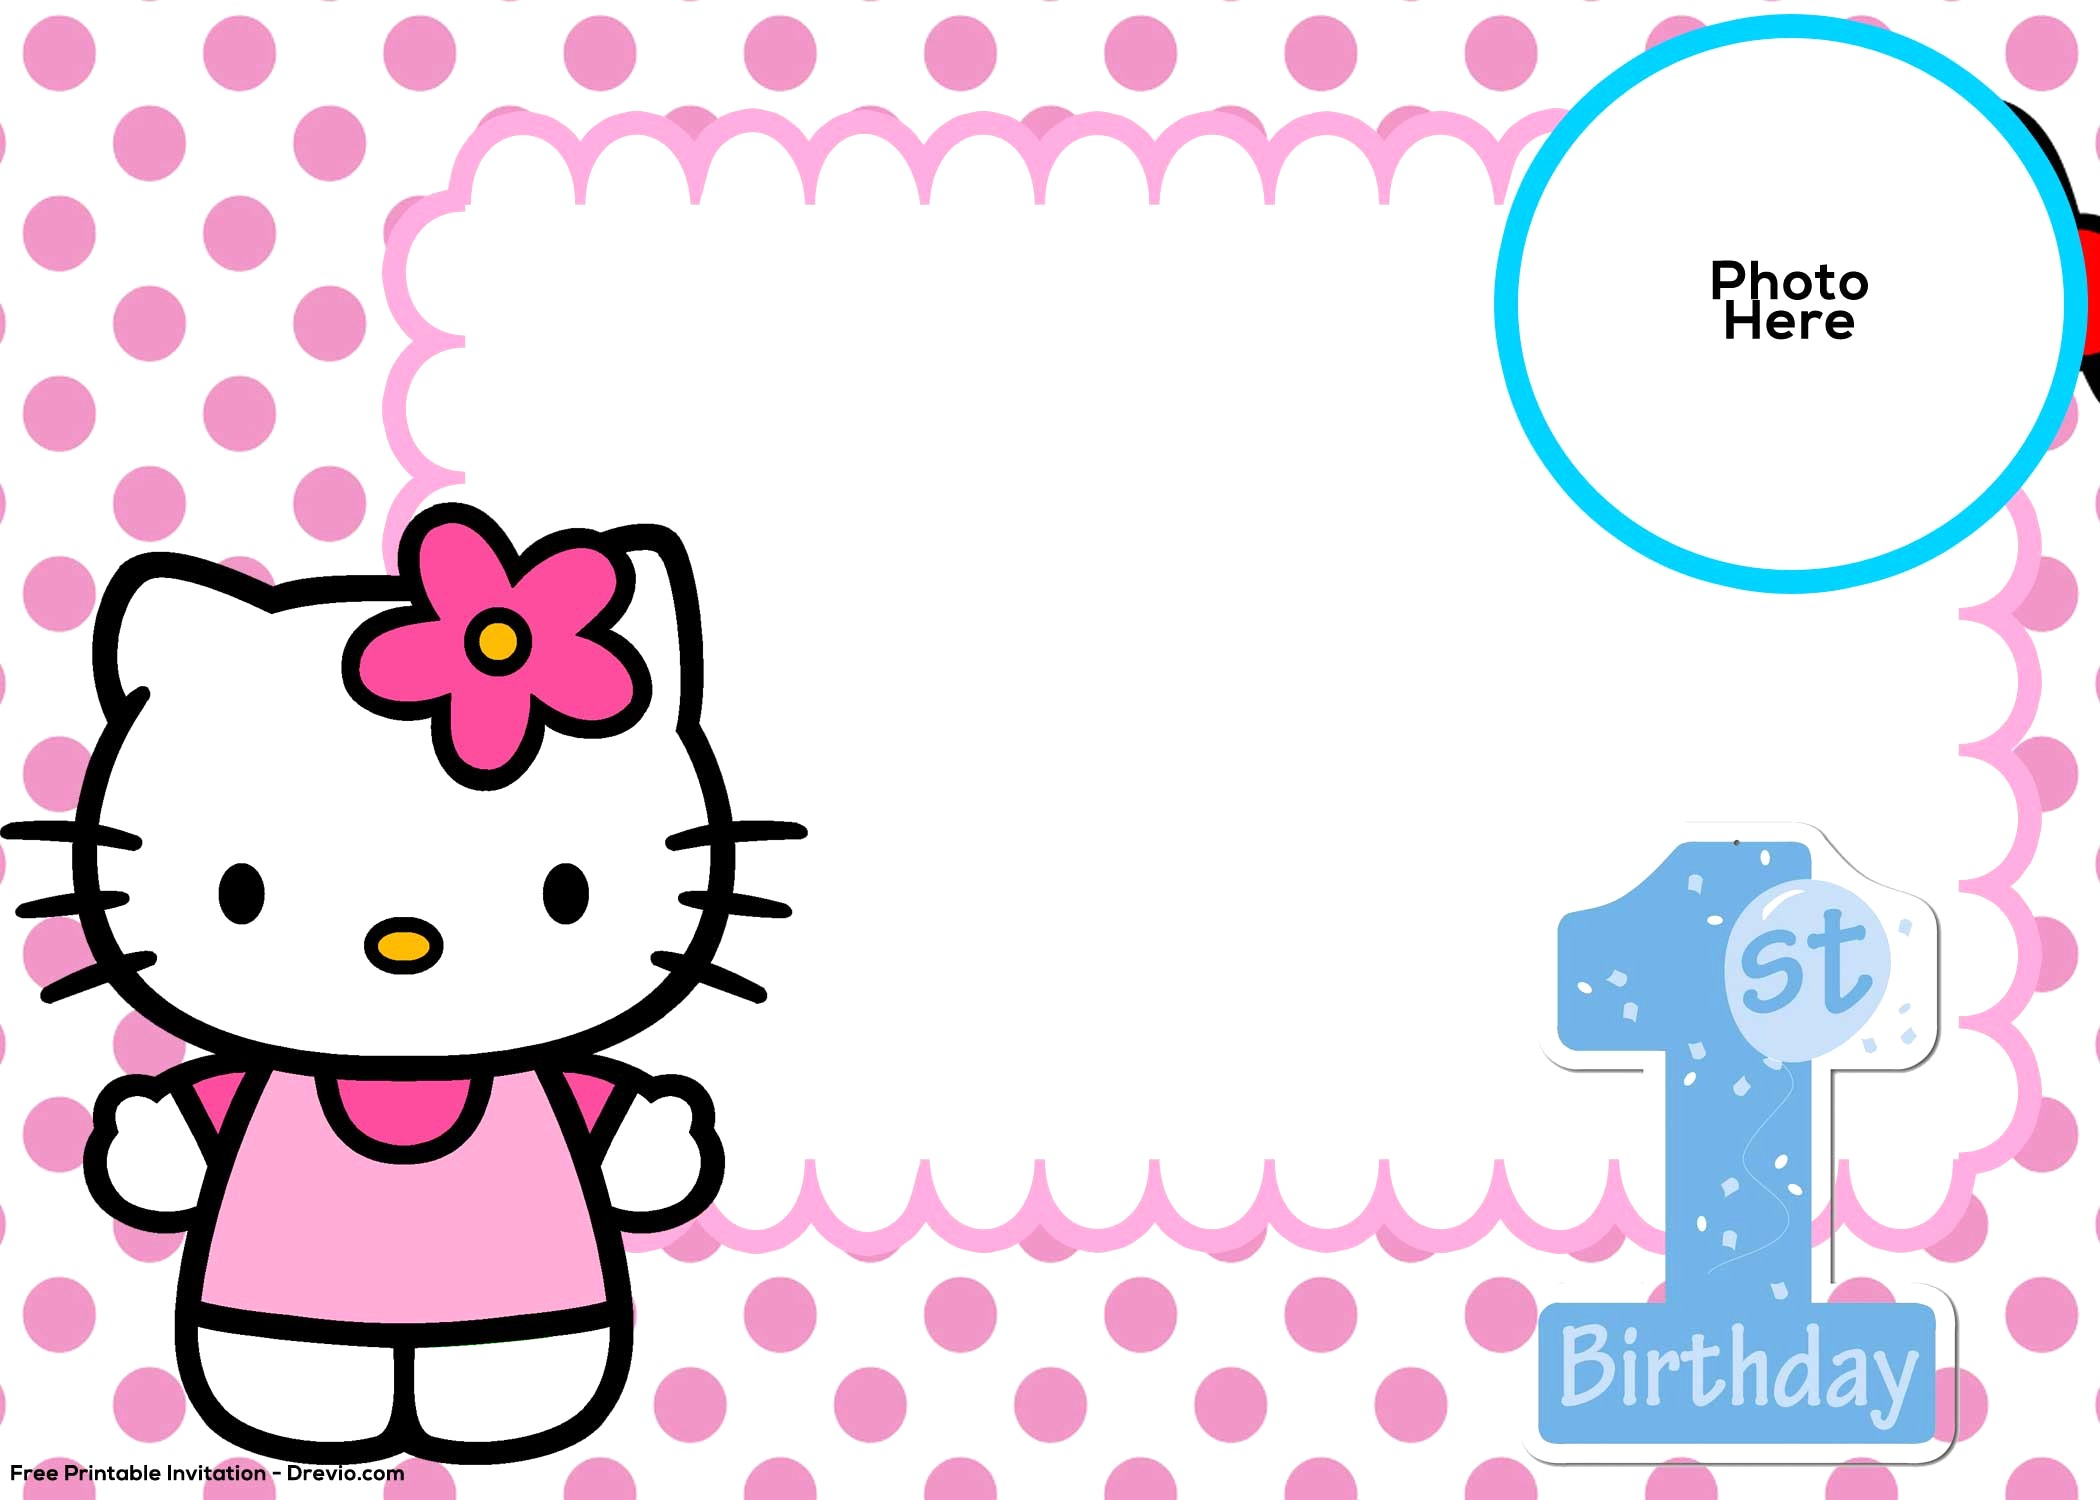 019 Template Ideas Birthday Invitation Free Hello Kitty 1st Flower intended for sizing 2100 X 1500